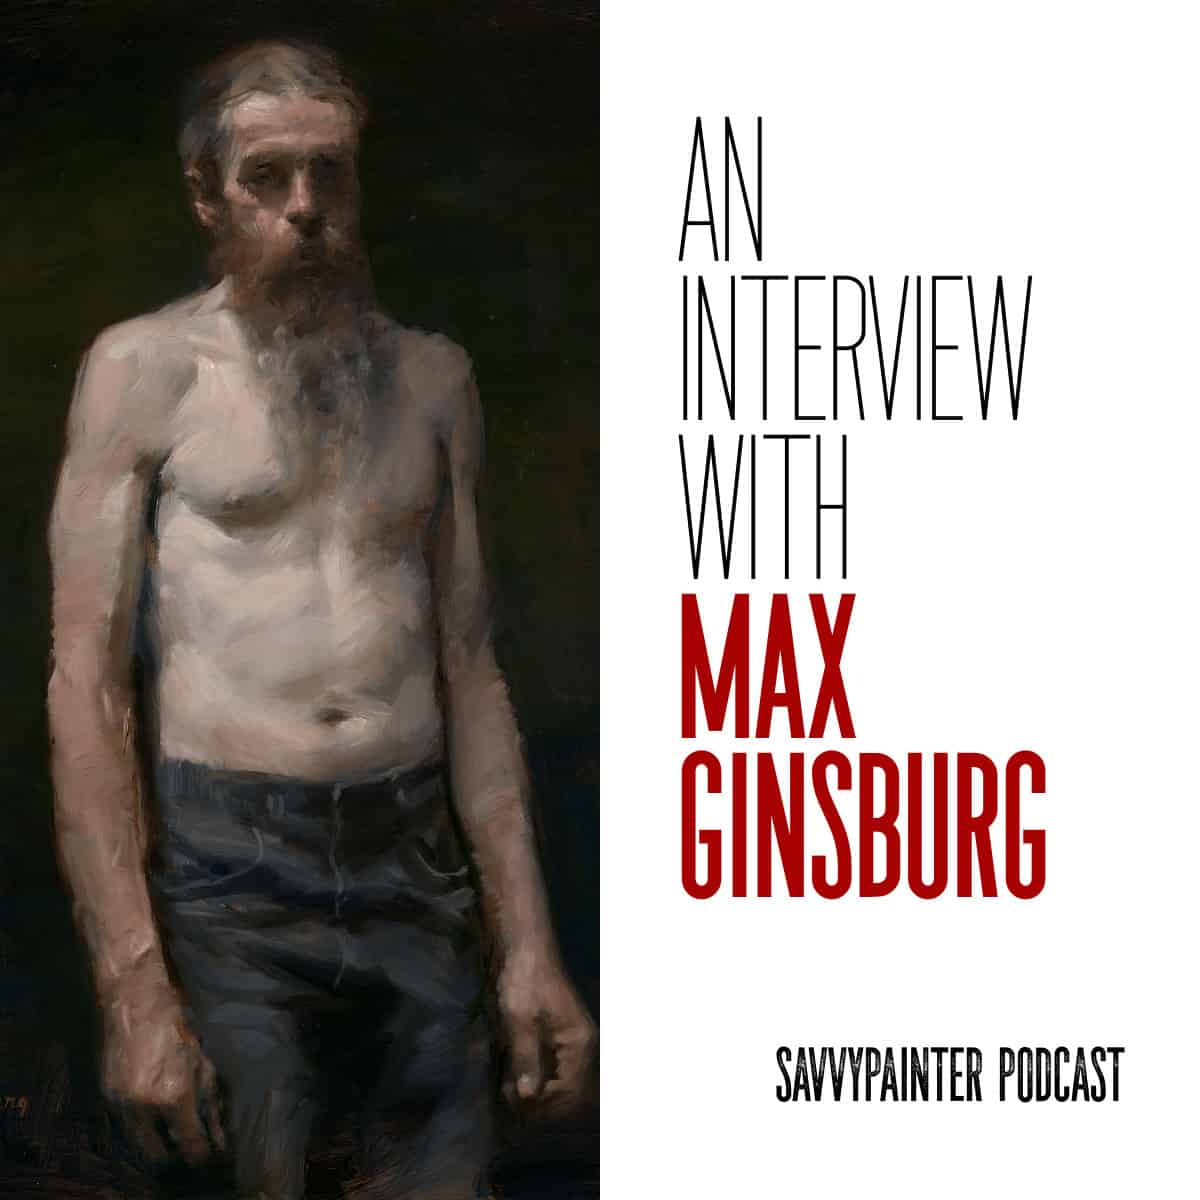 Max Ginsburg podcast interview